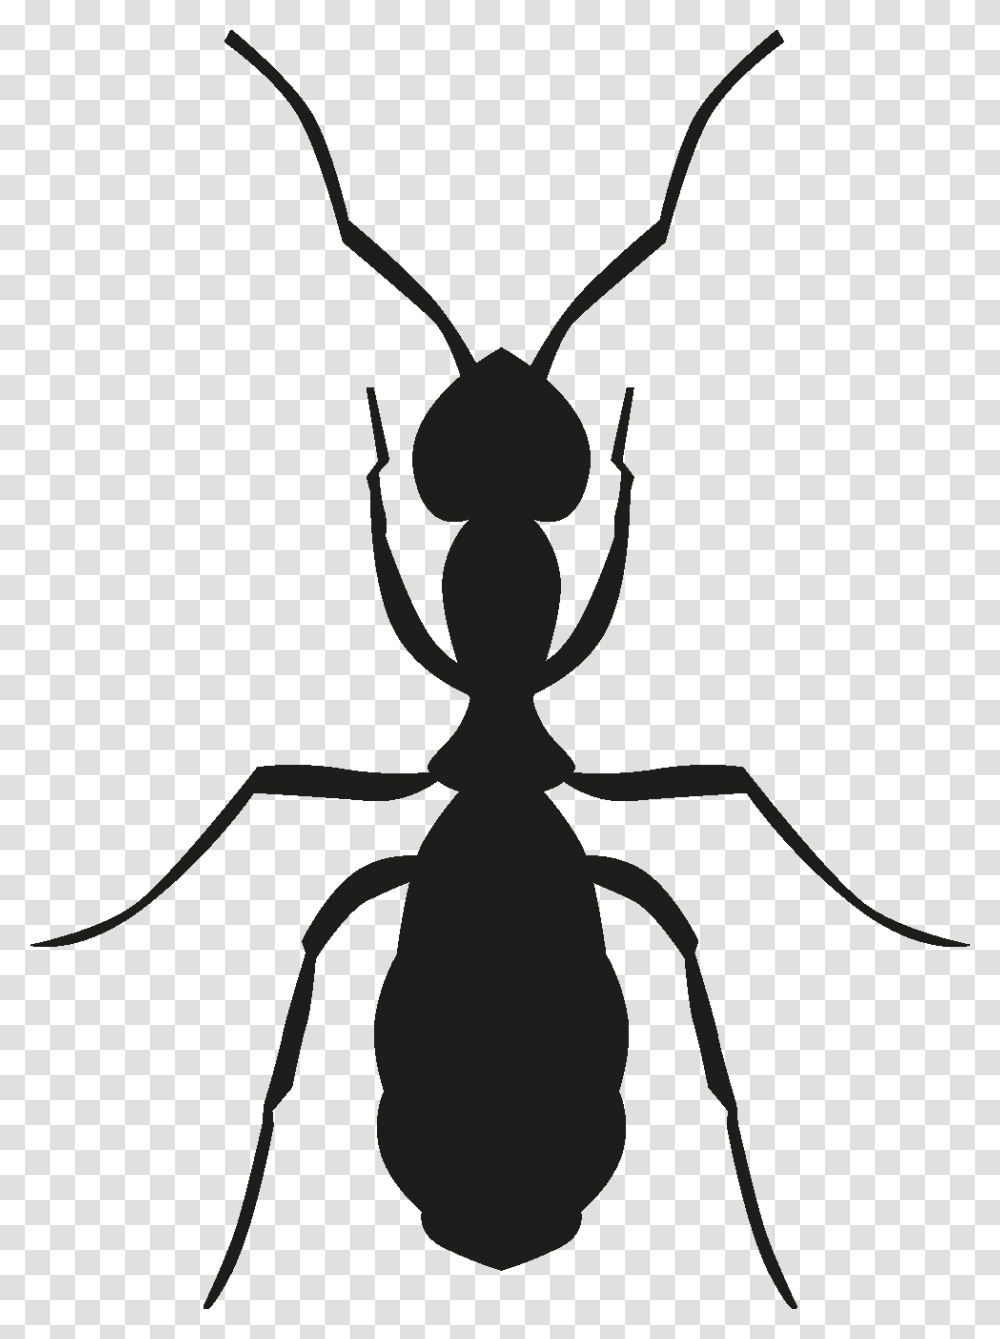 Insects Set Silhouette Animated Ant Images Walk, Spider, Invertebrate, Animal, Arachnid Transparent Png